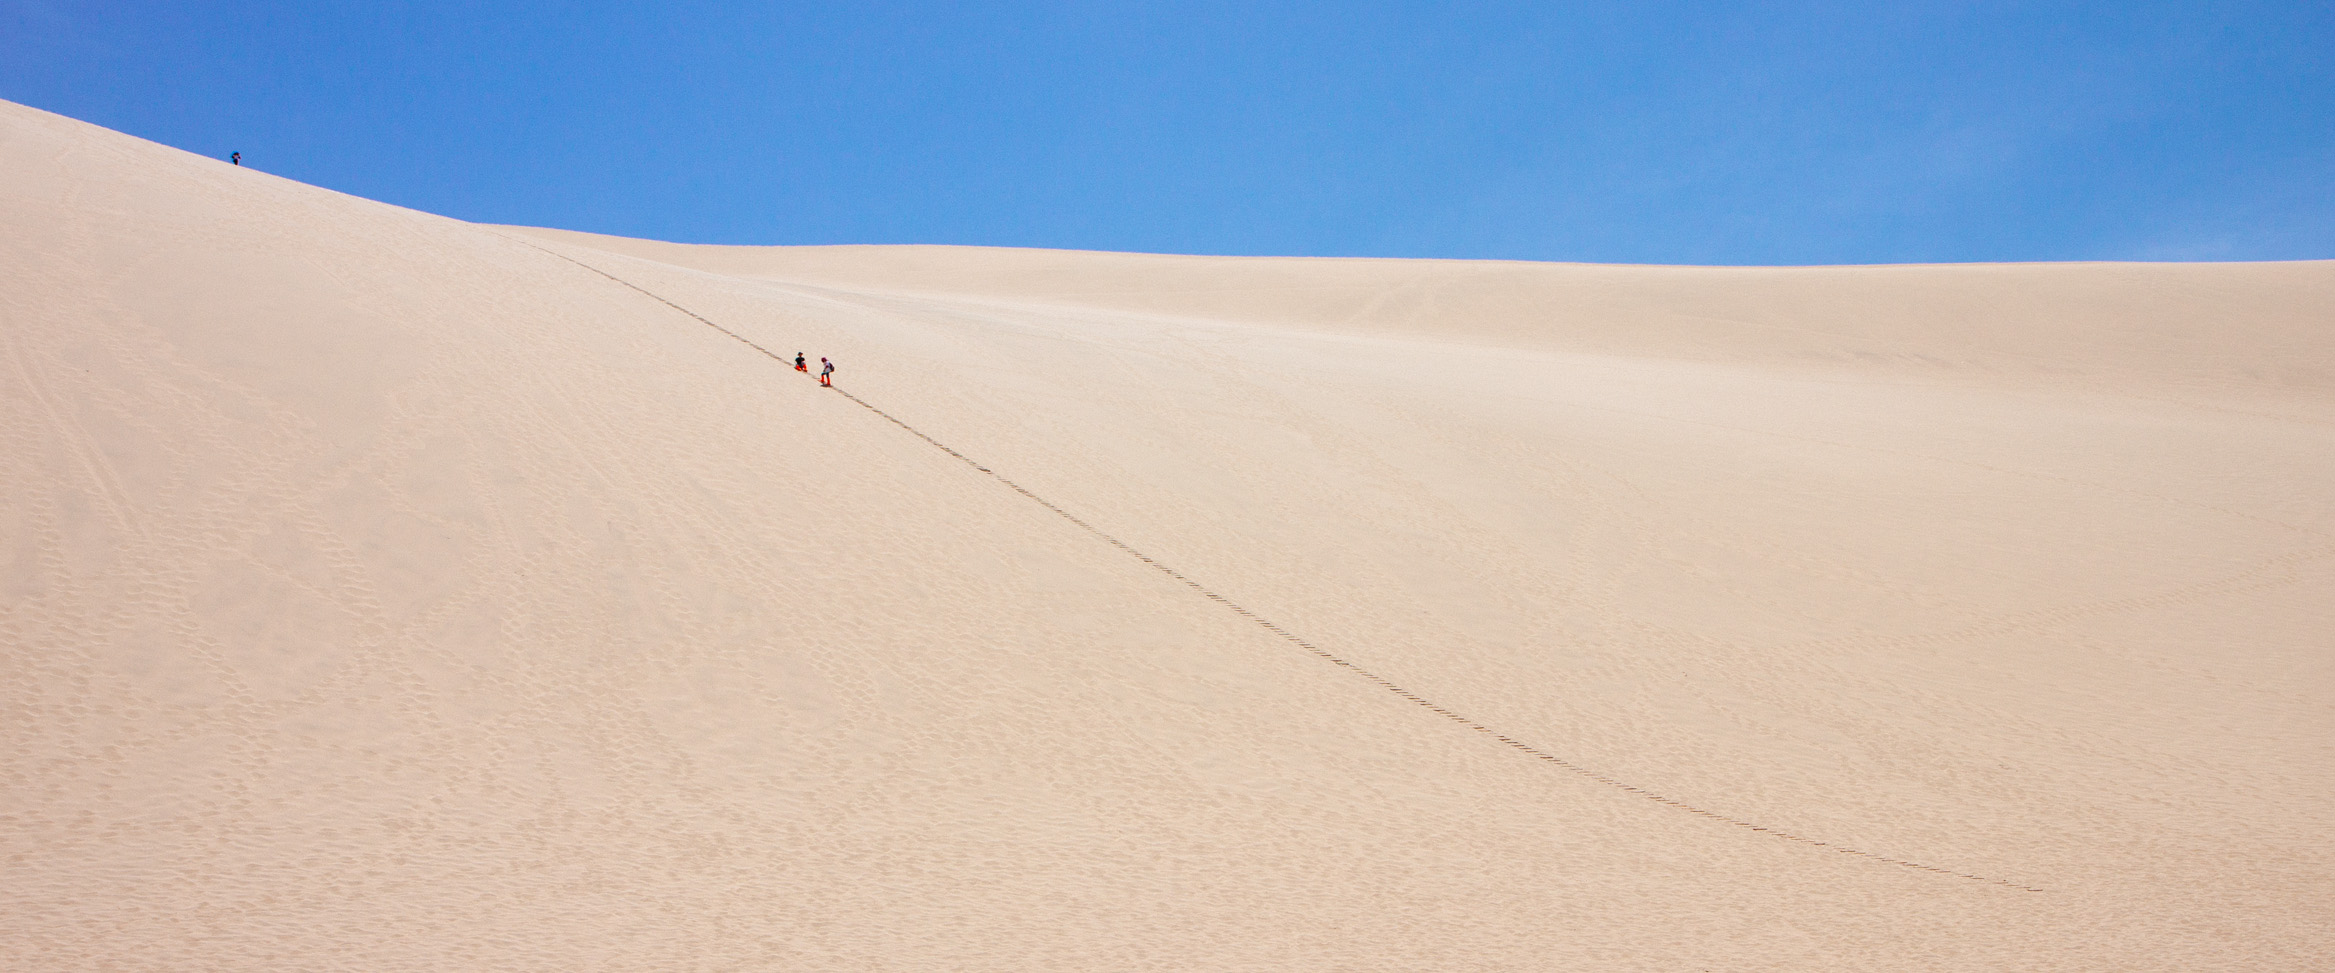 Tall Sand Dunes with Ladder Access Up